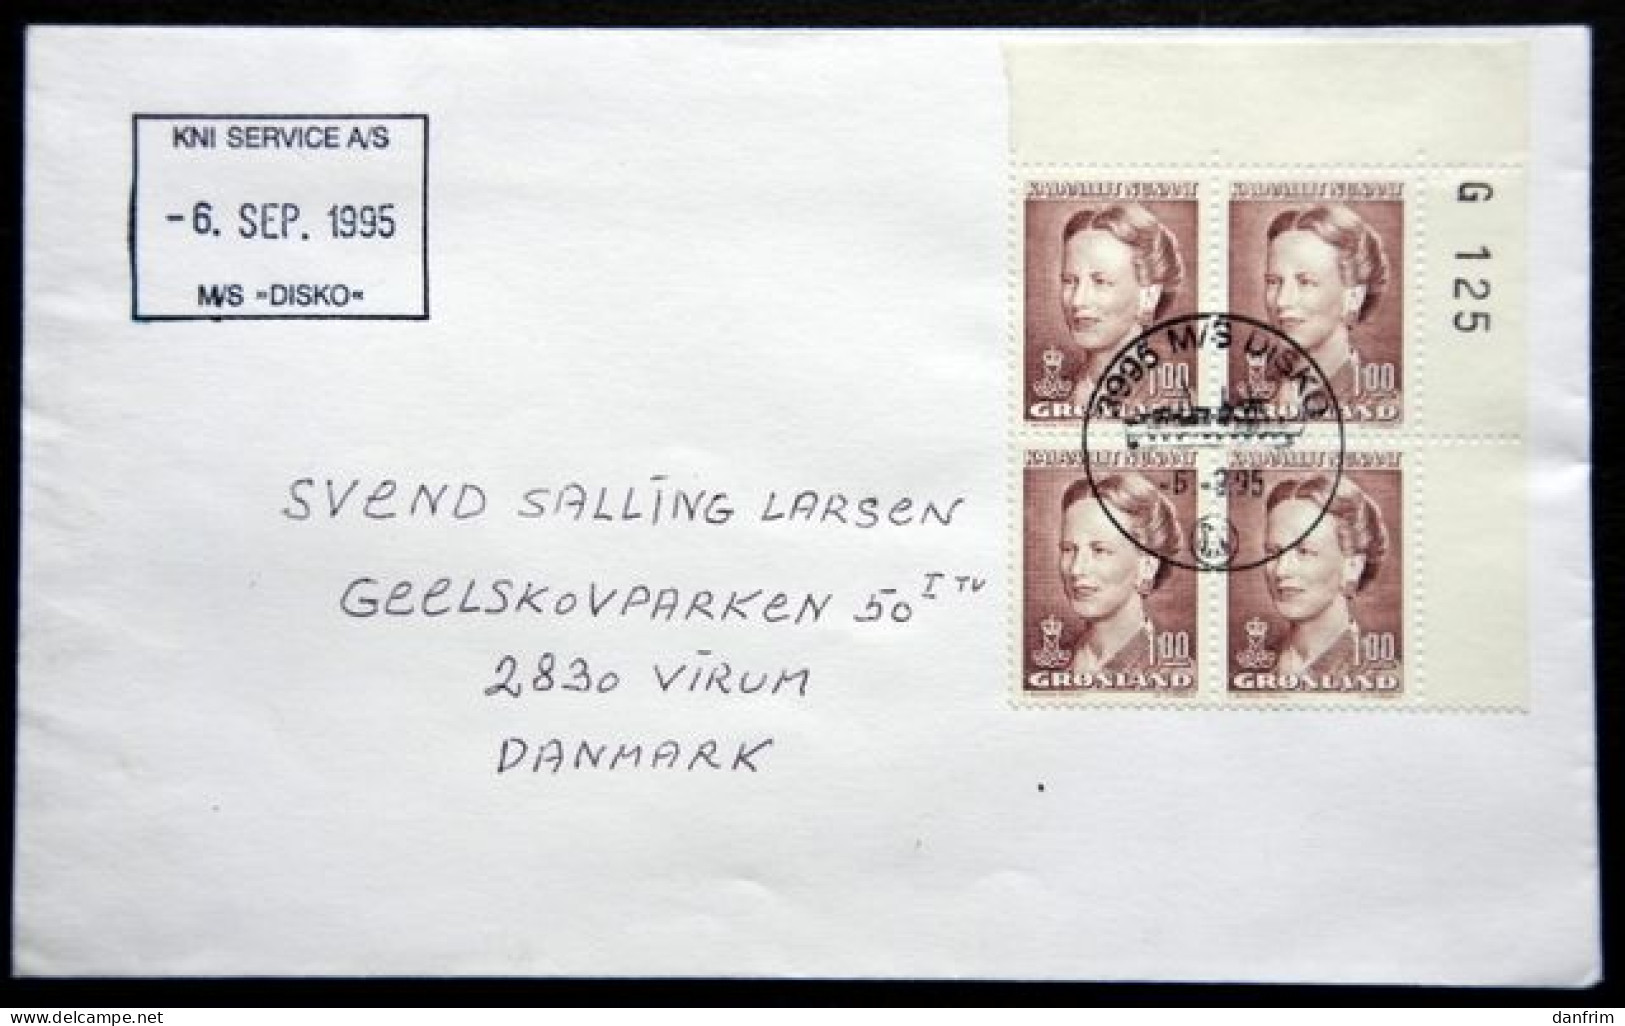 Greenland 1995  M/S DISKO 6-9-1995 Lot 6488 ) - Lettres & Documents